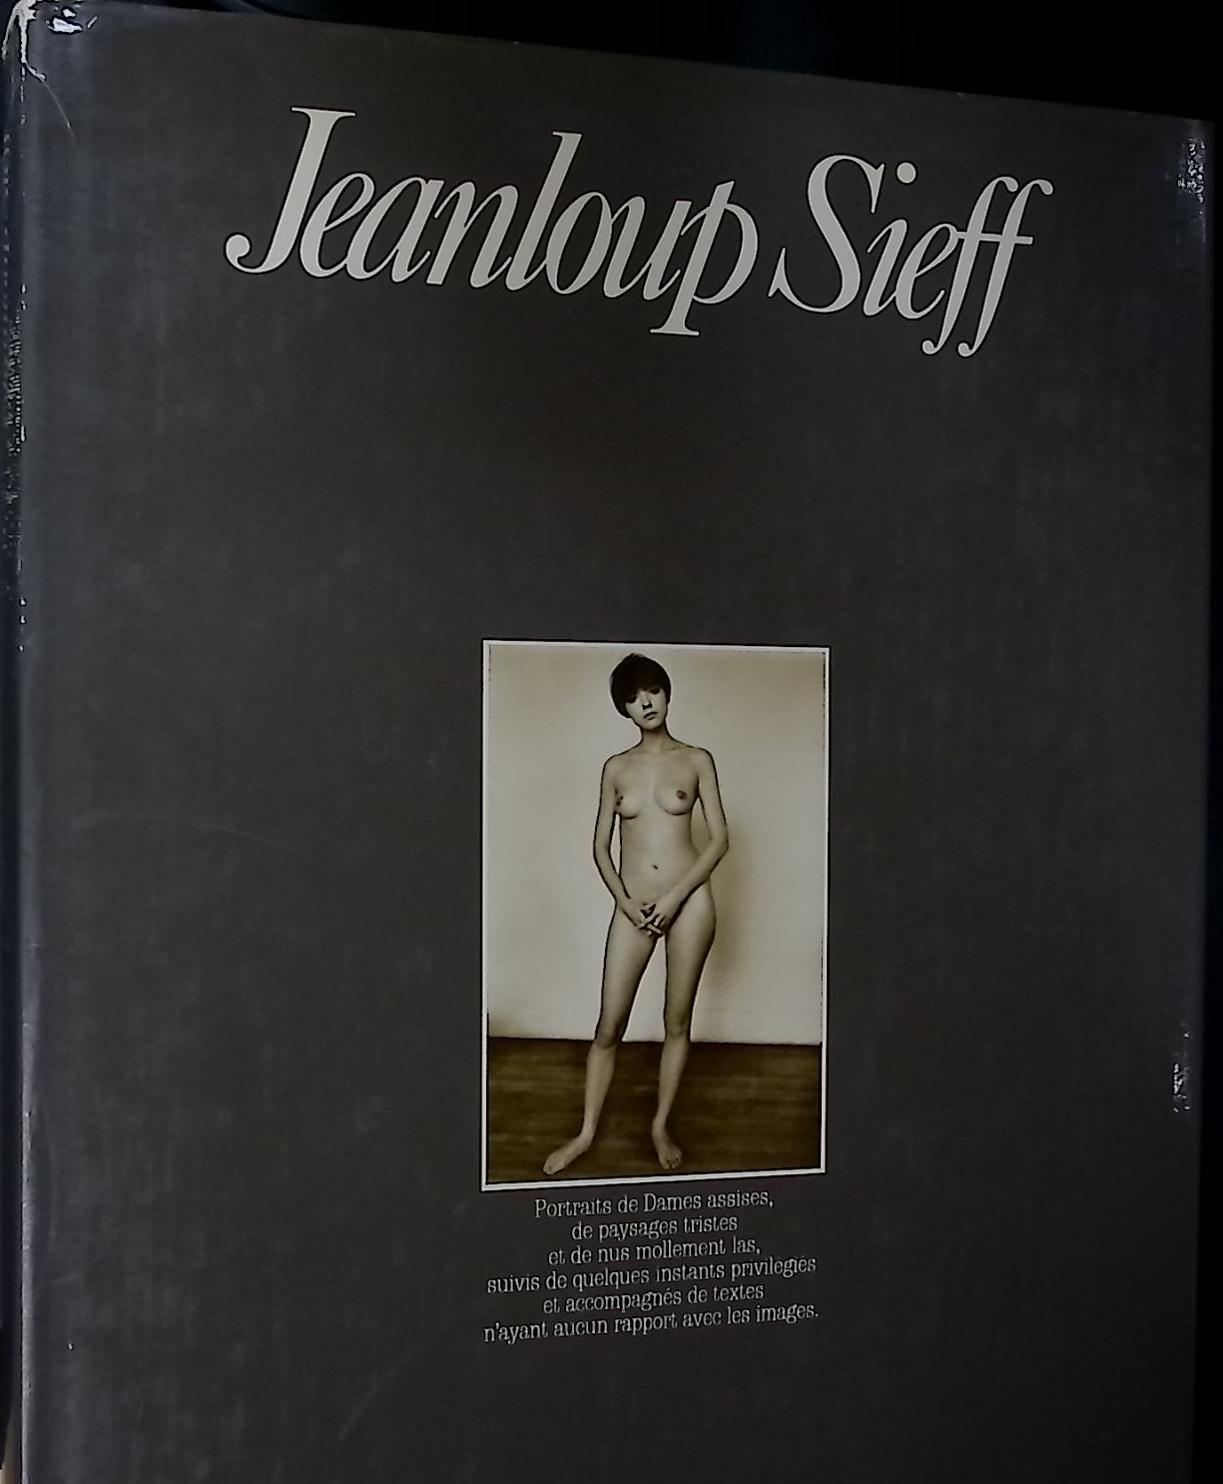 Jeanloup Sieff. Signed copy.